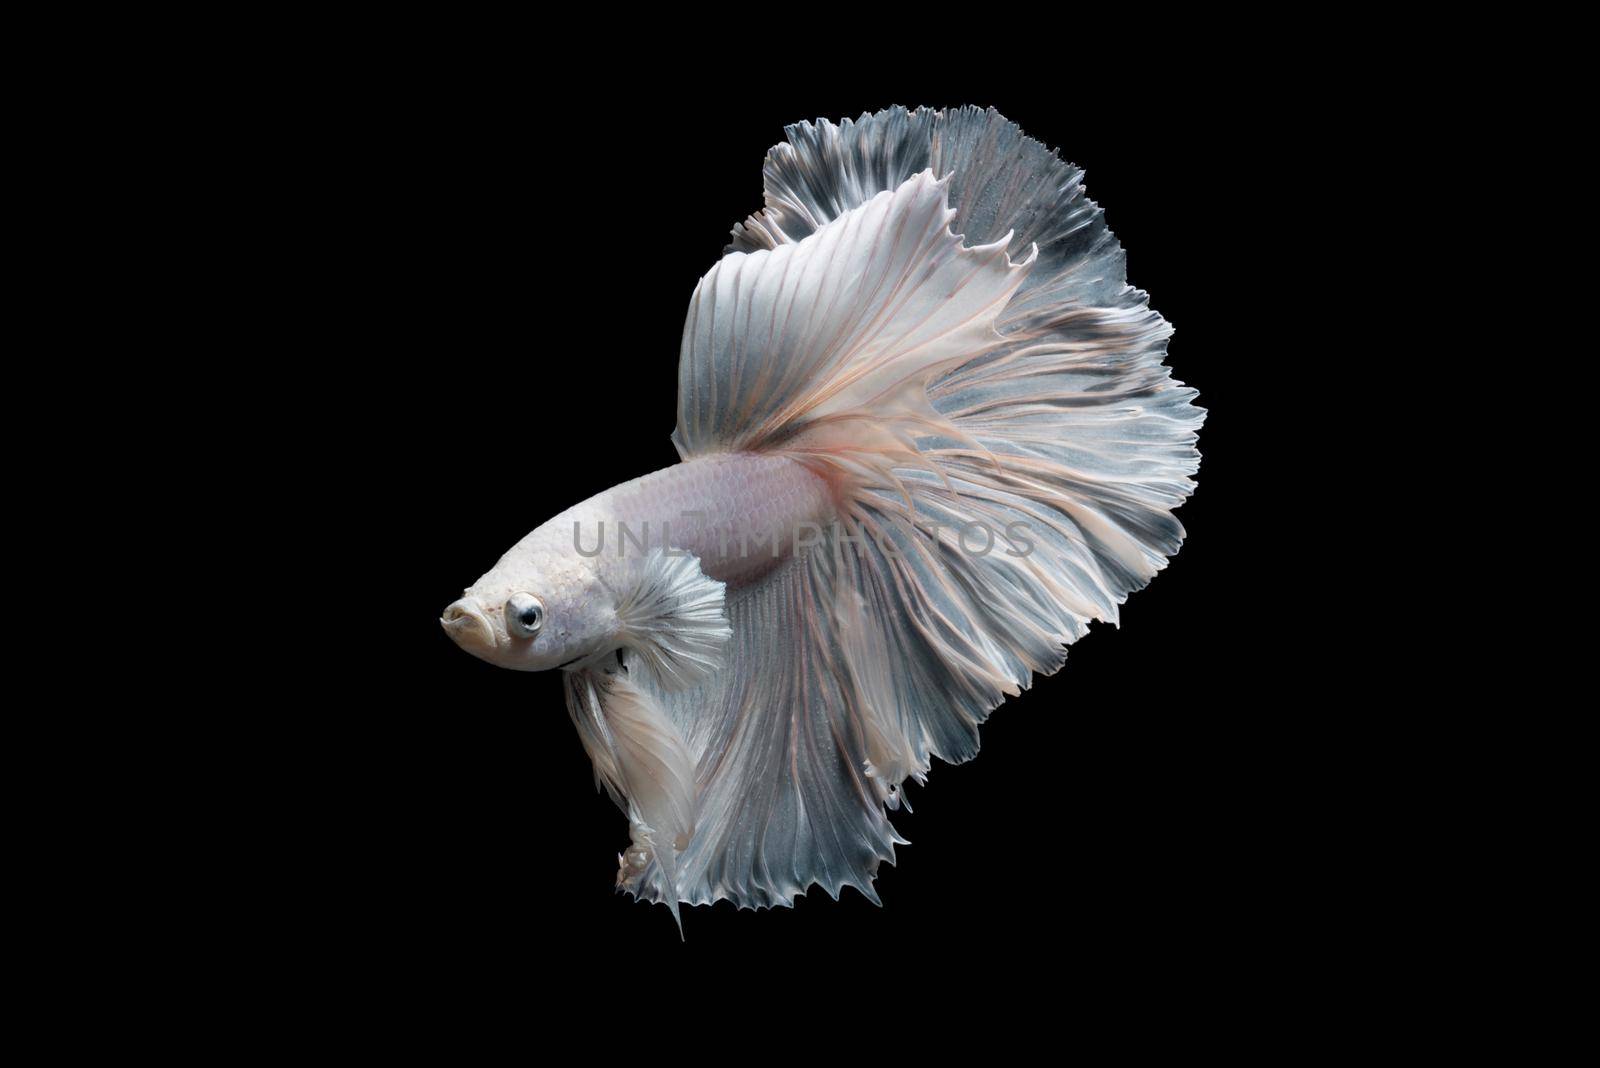 Betta fish or Siamese fighting fish in movement isolated on black background.